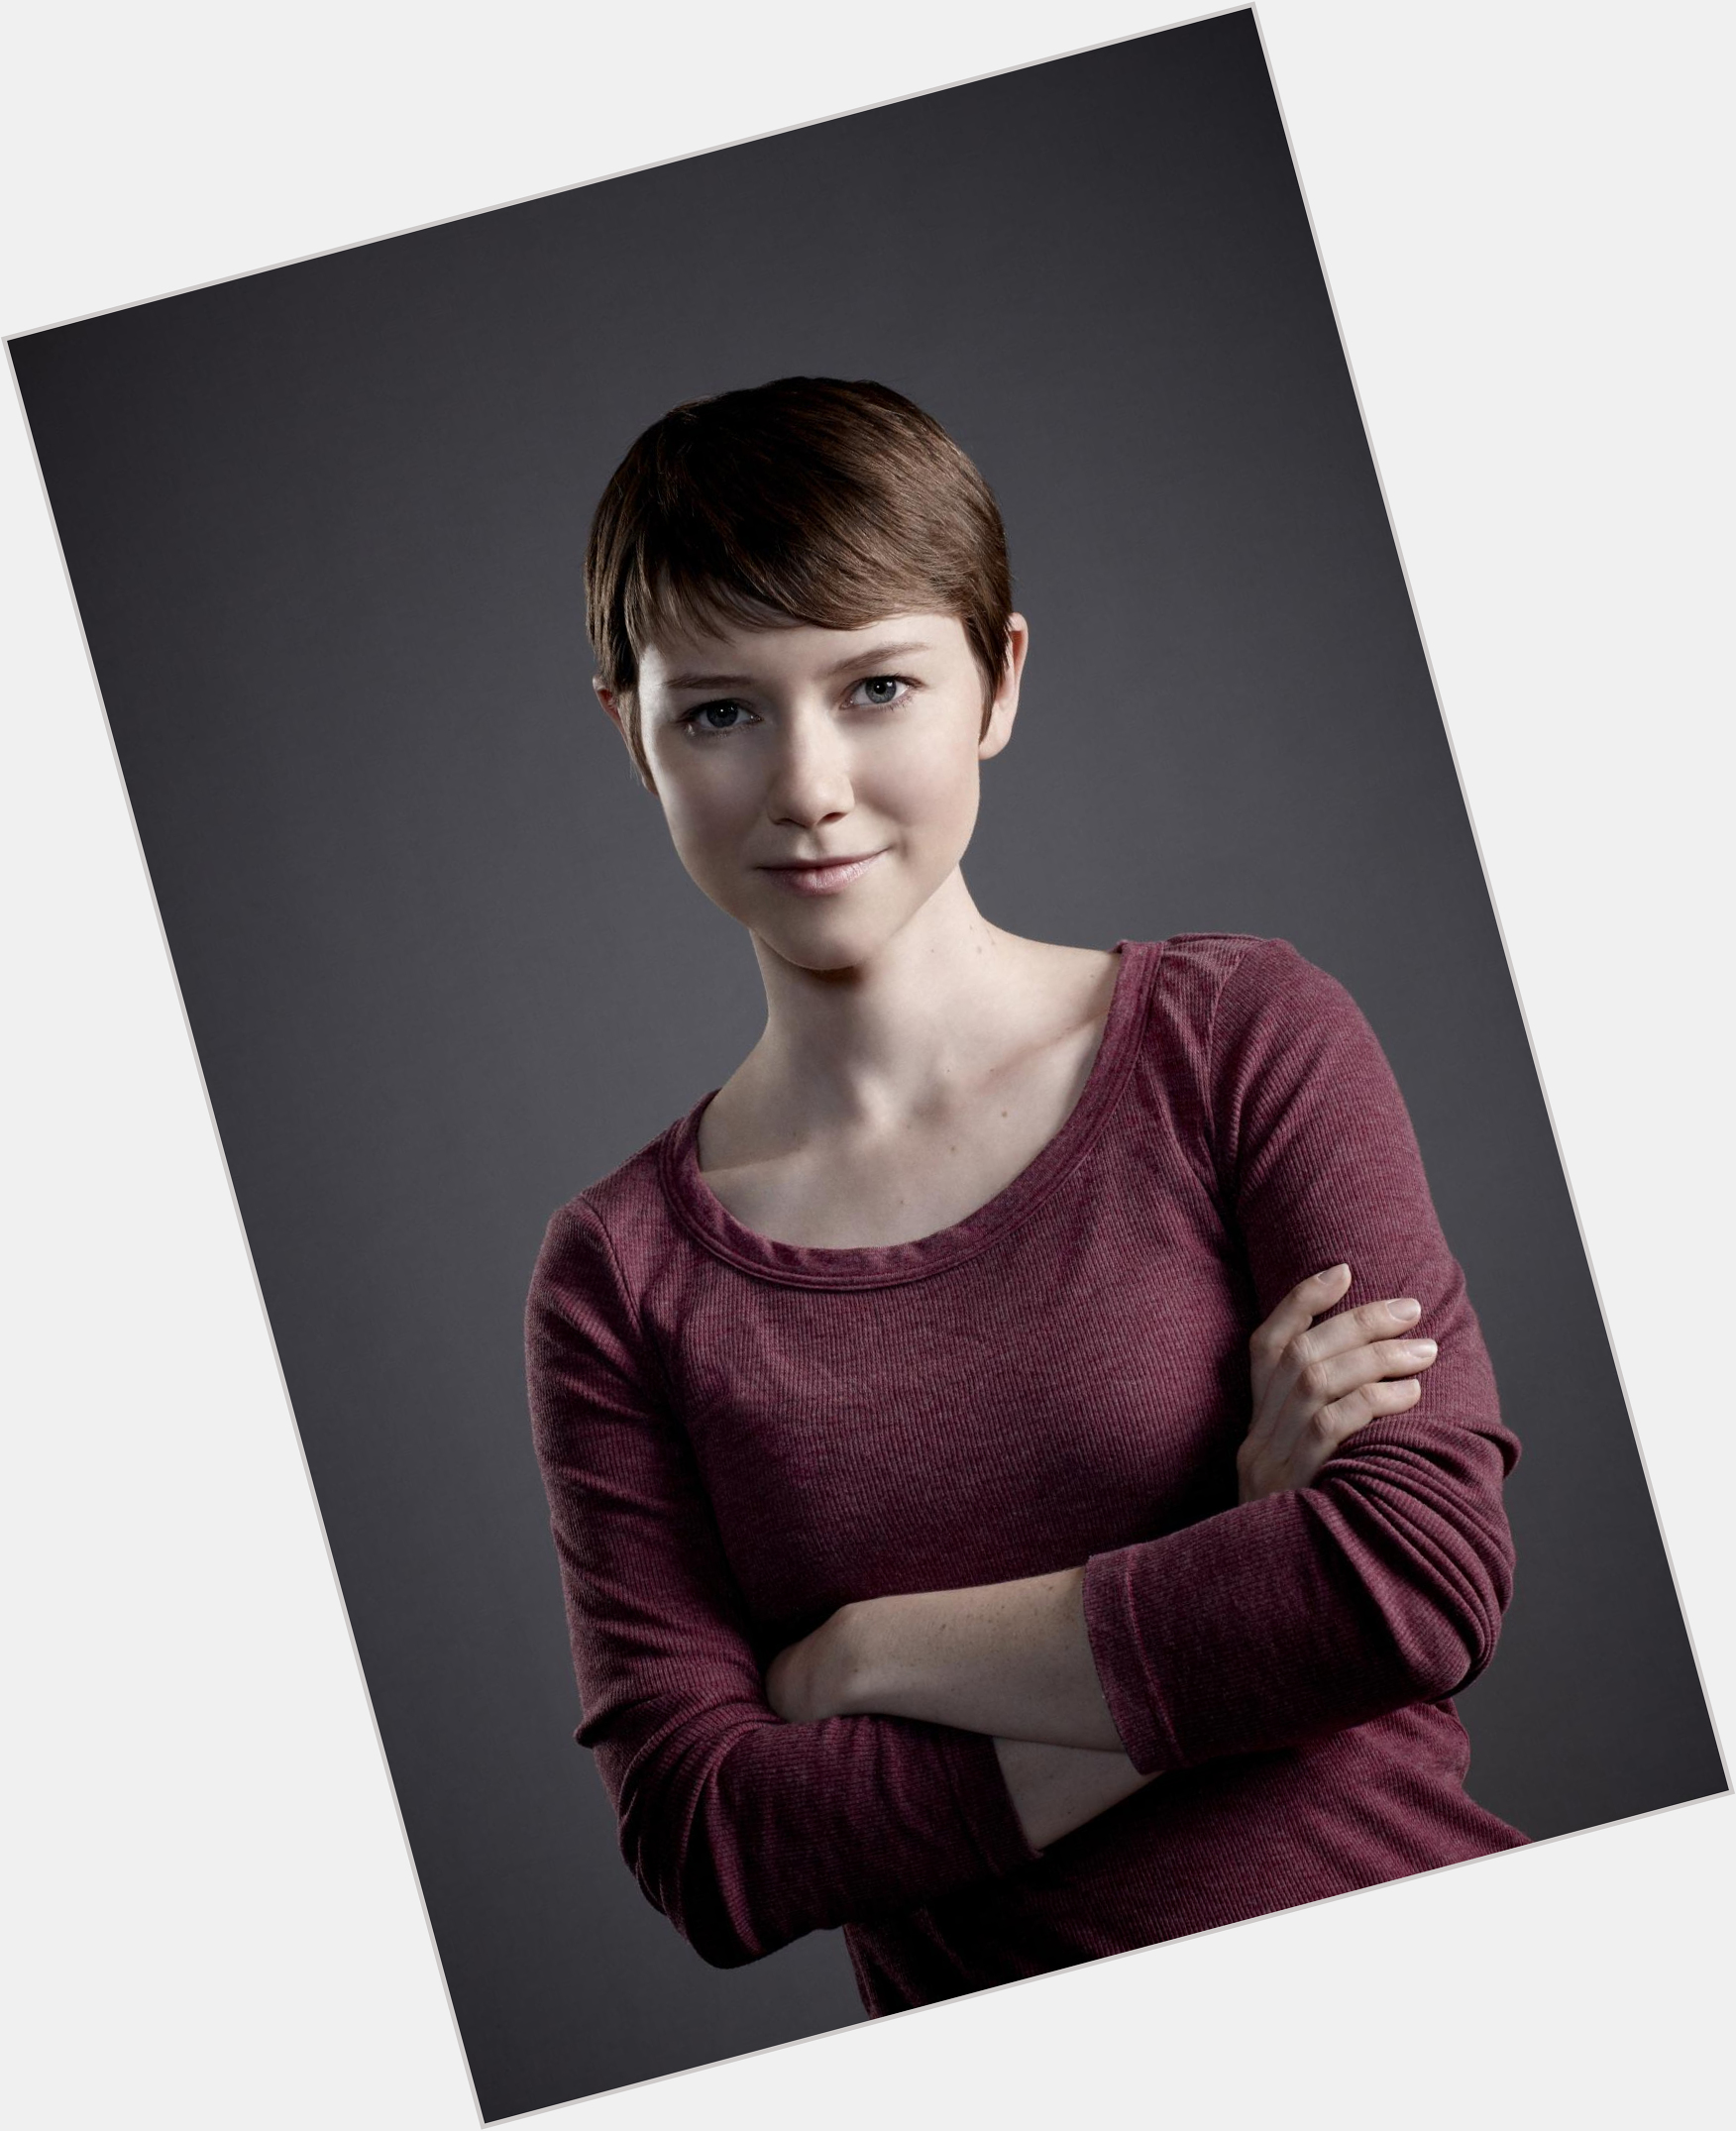 Https://fanpagepress.net/m/V/valorie Curry The Following 6